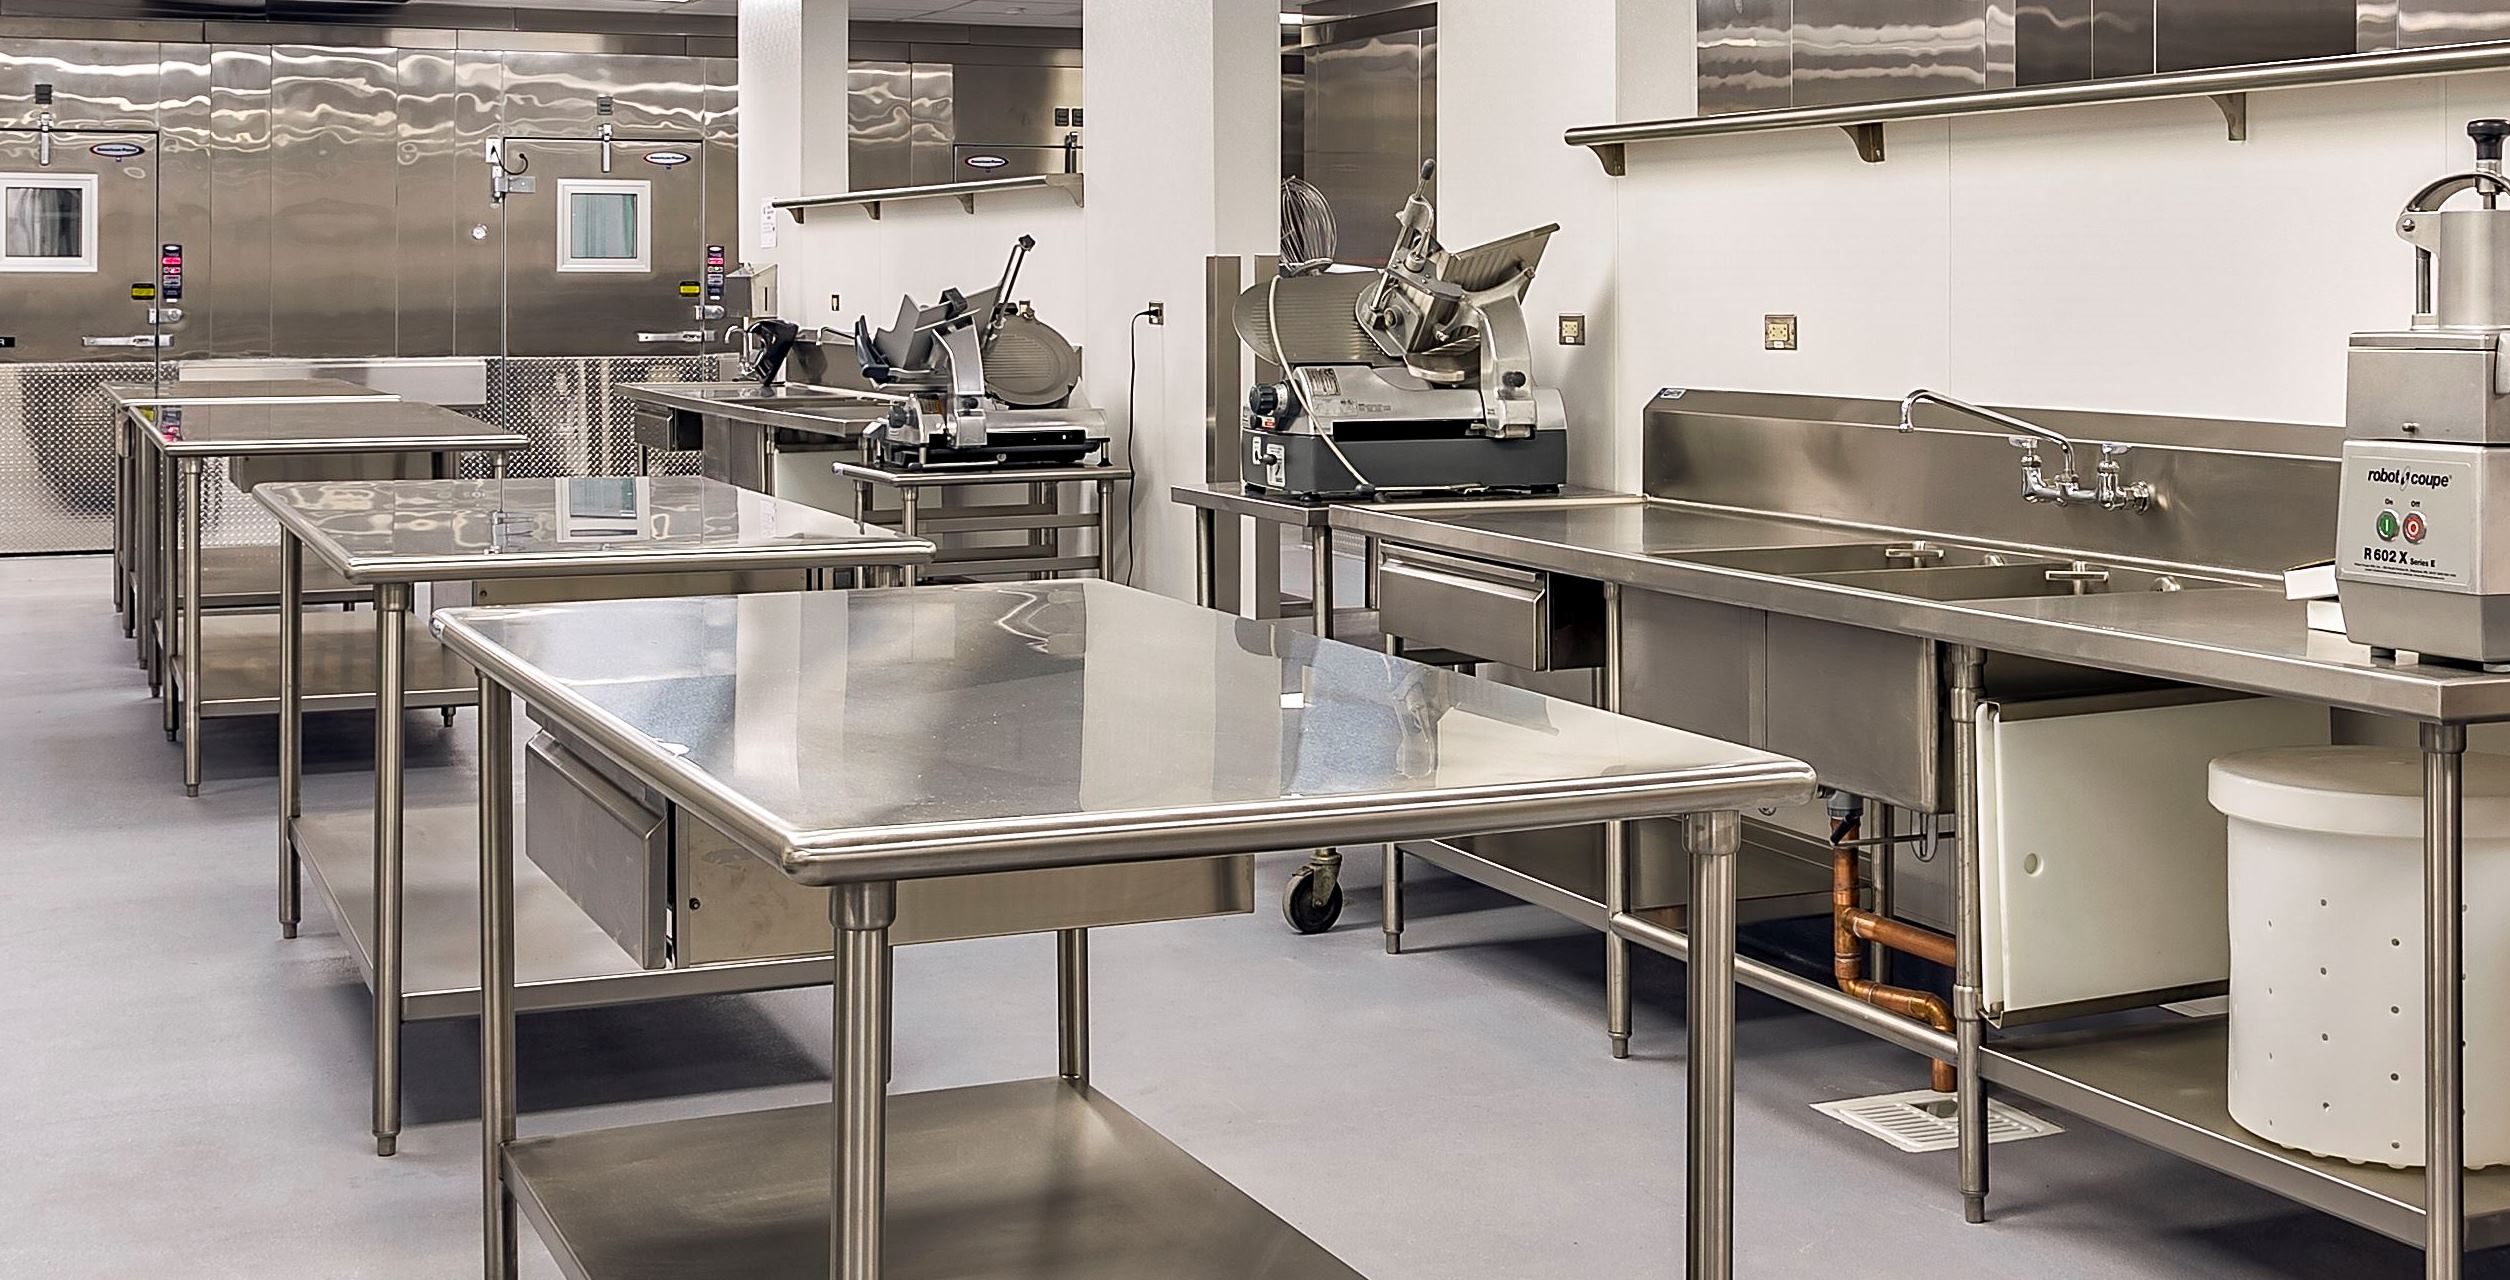 Stainless Steel In Attractive Stainless Steel Kitchen Tables In Wide Industrial Kitchen With Glossy Counter And Wide Sink Kitchens Effective Stainless Steel Kitchen Tables For Commercial Kitchen